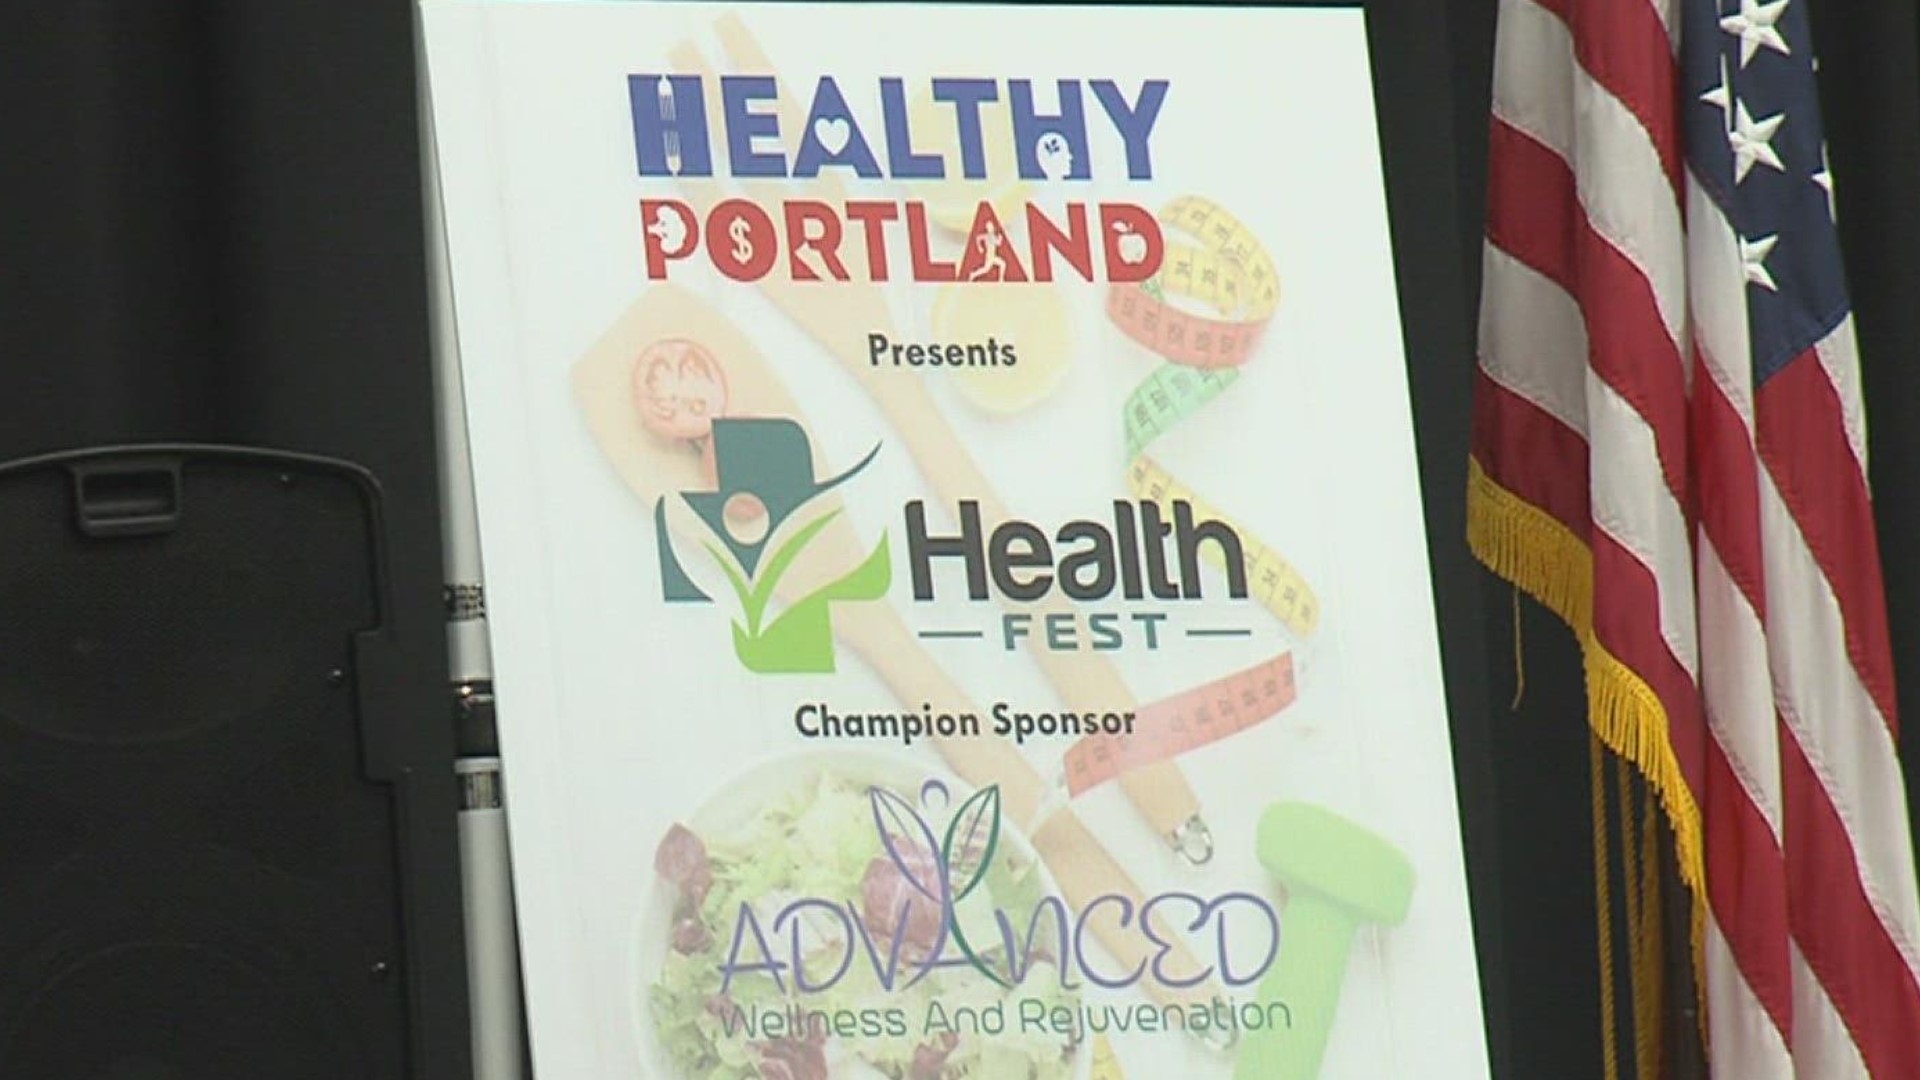 The Portland Chamber of Commerce held their second event to 'make healthy fun'.